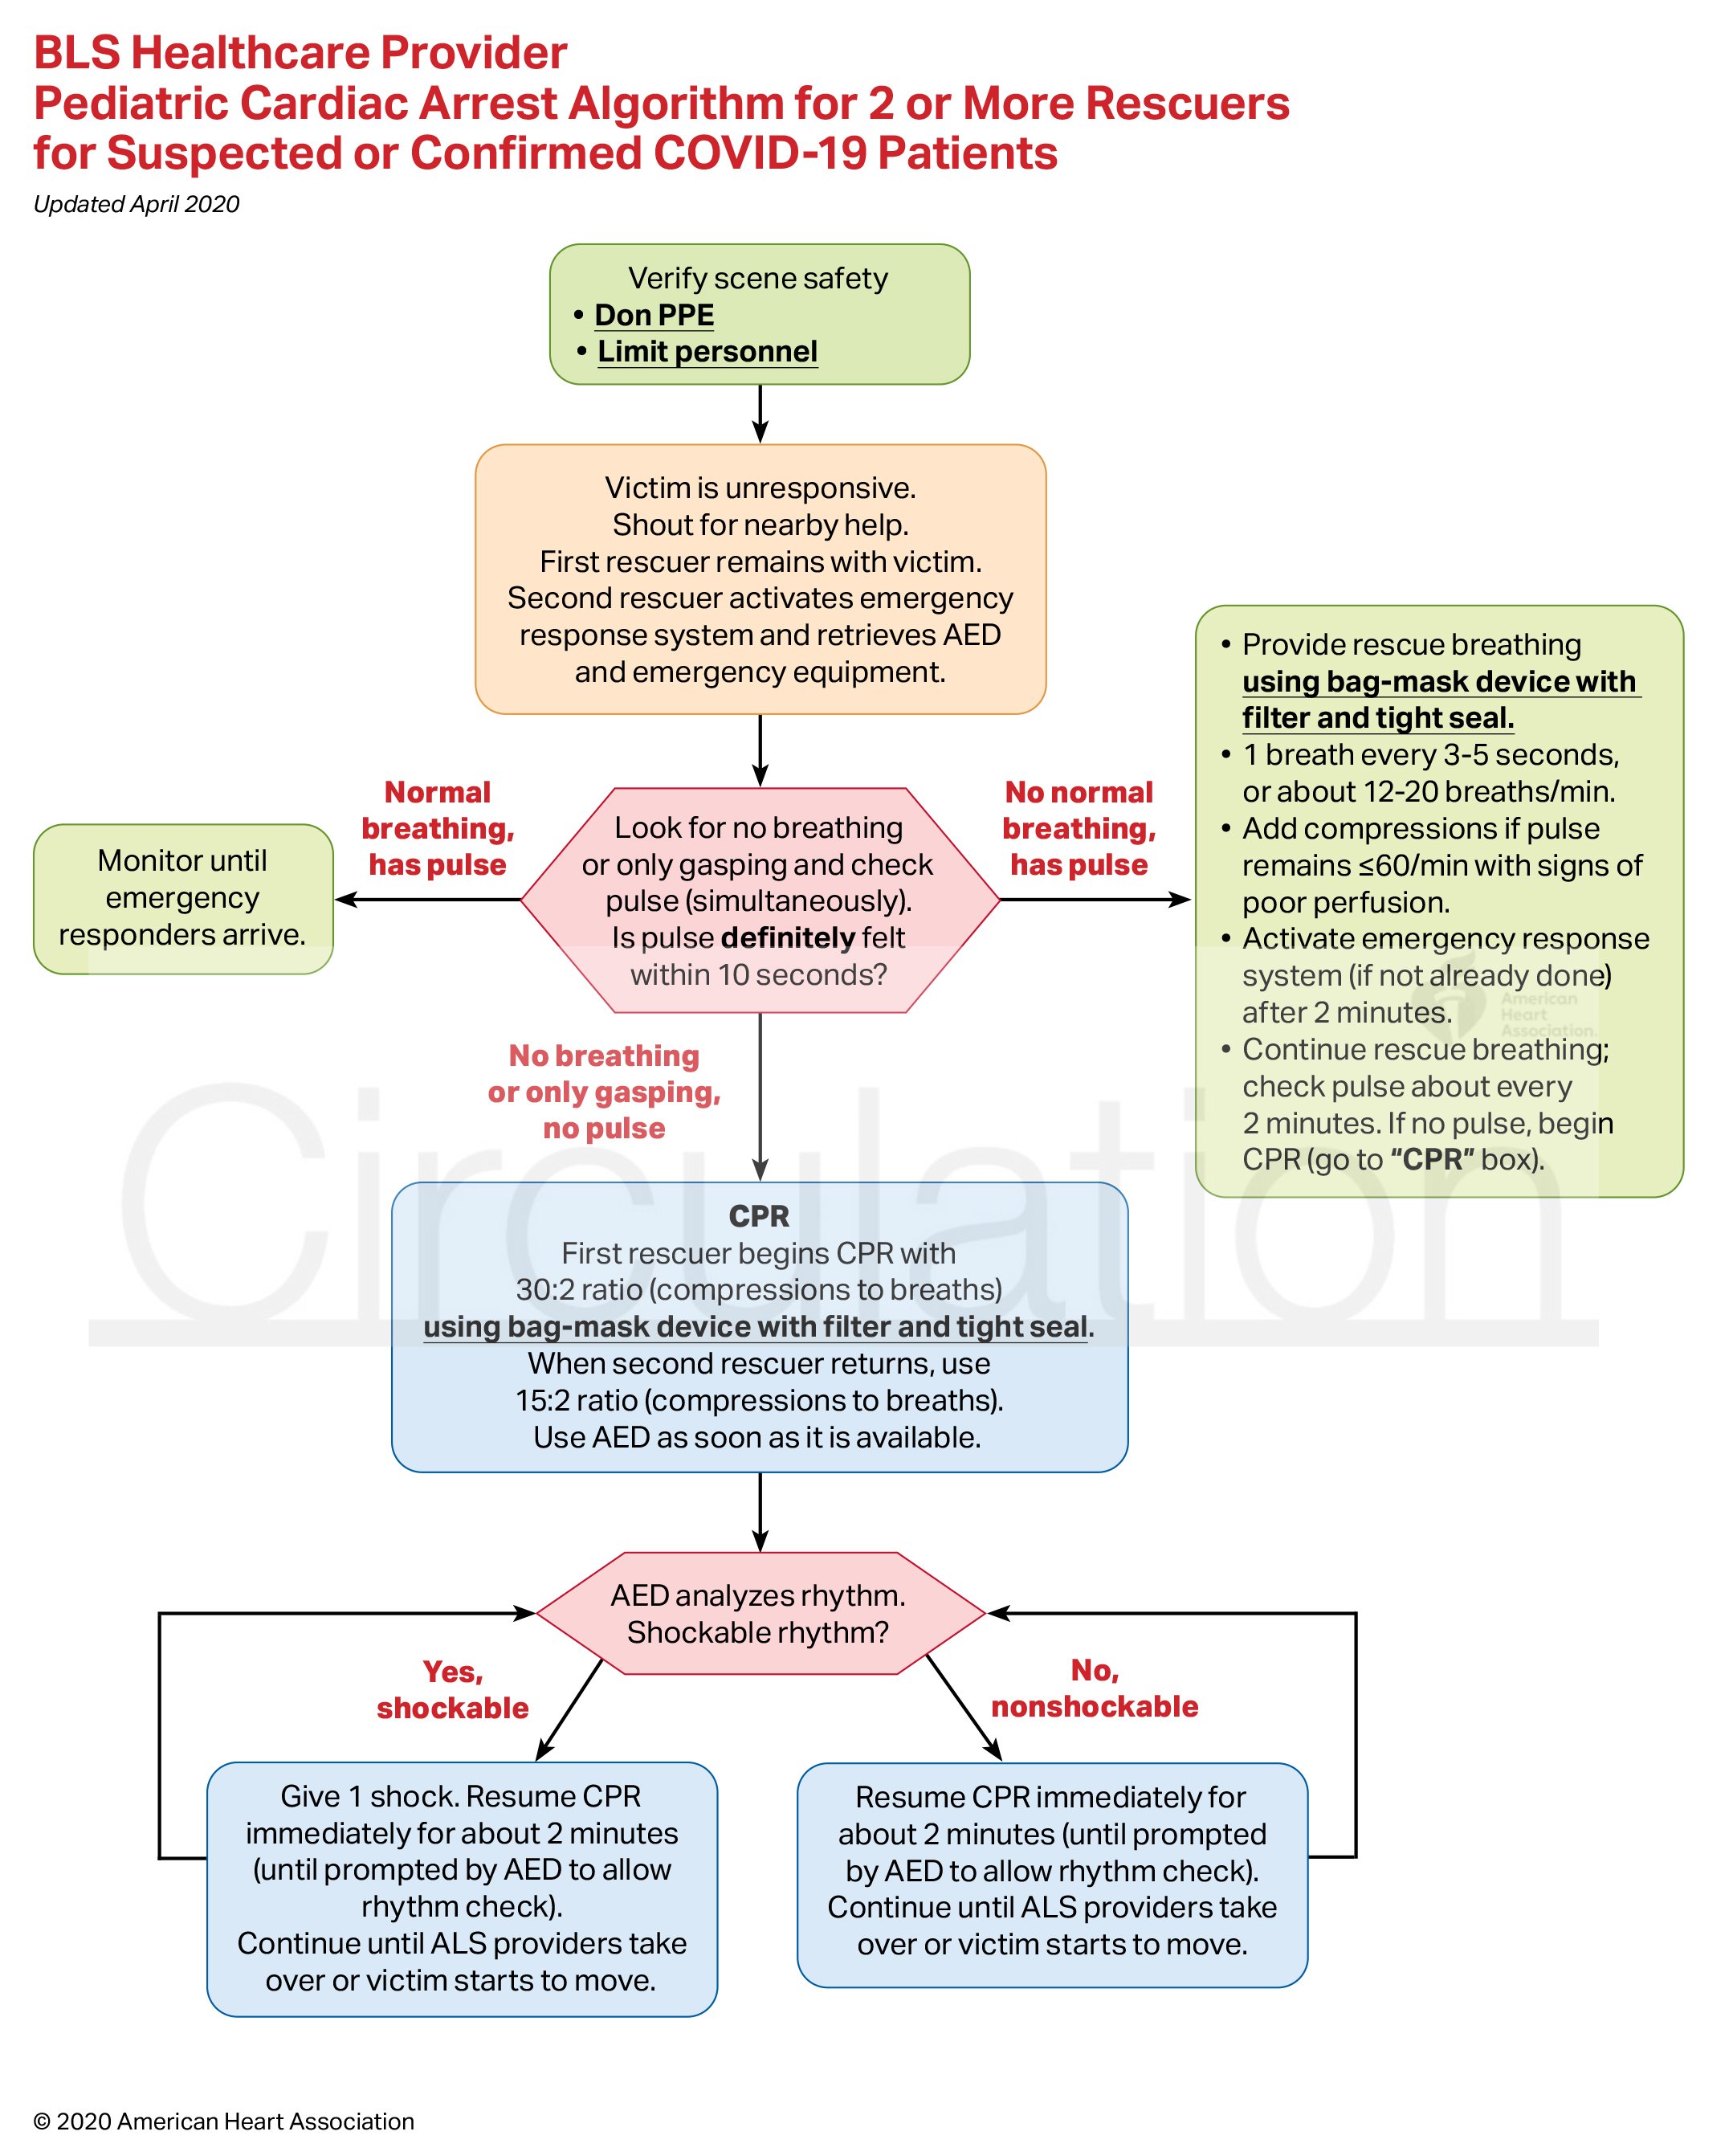 Figure 4. BLS Healthcare Provider Pediatric Cardiac Arrest algorithm for 2 or more rescuers for suspected or confirmed COVID-19 patients.